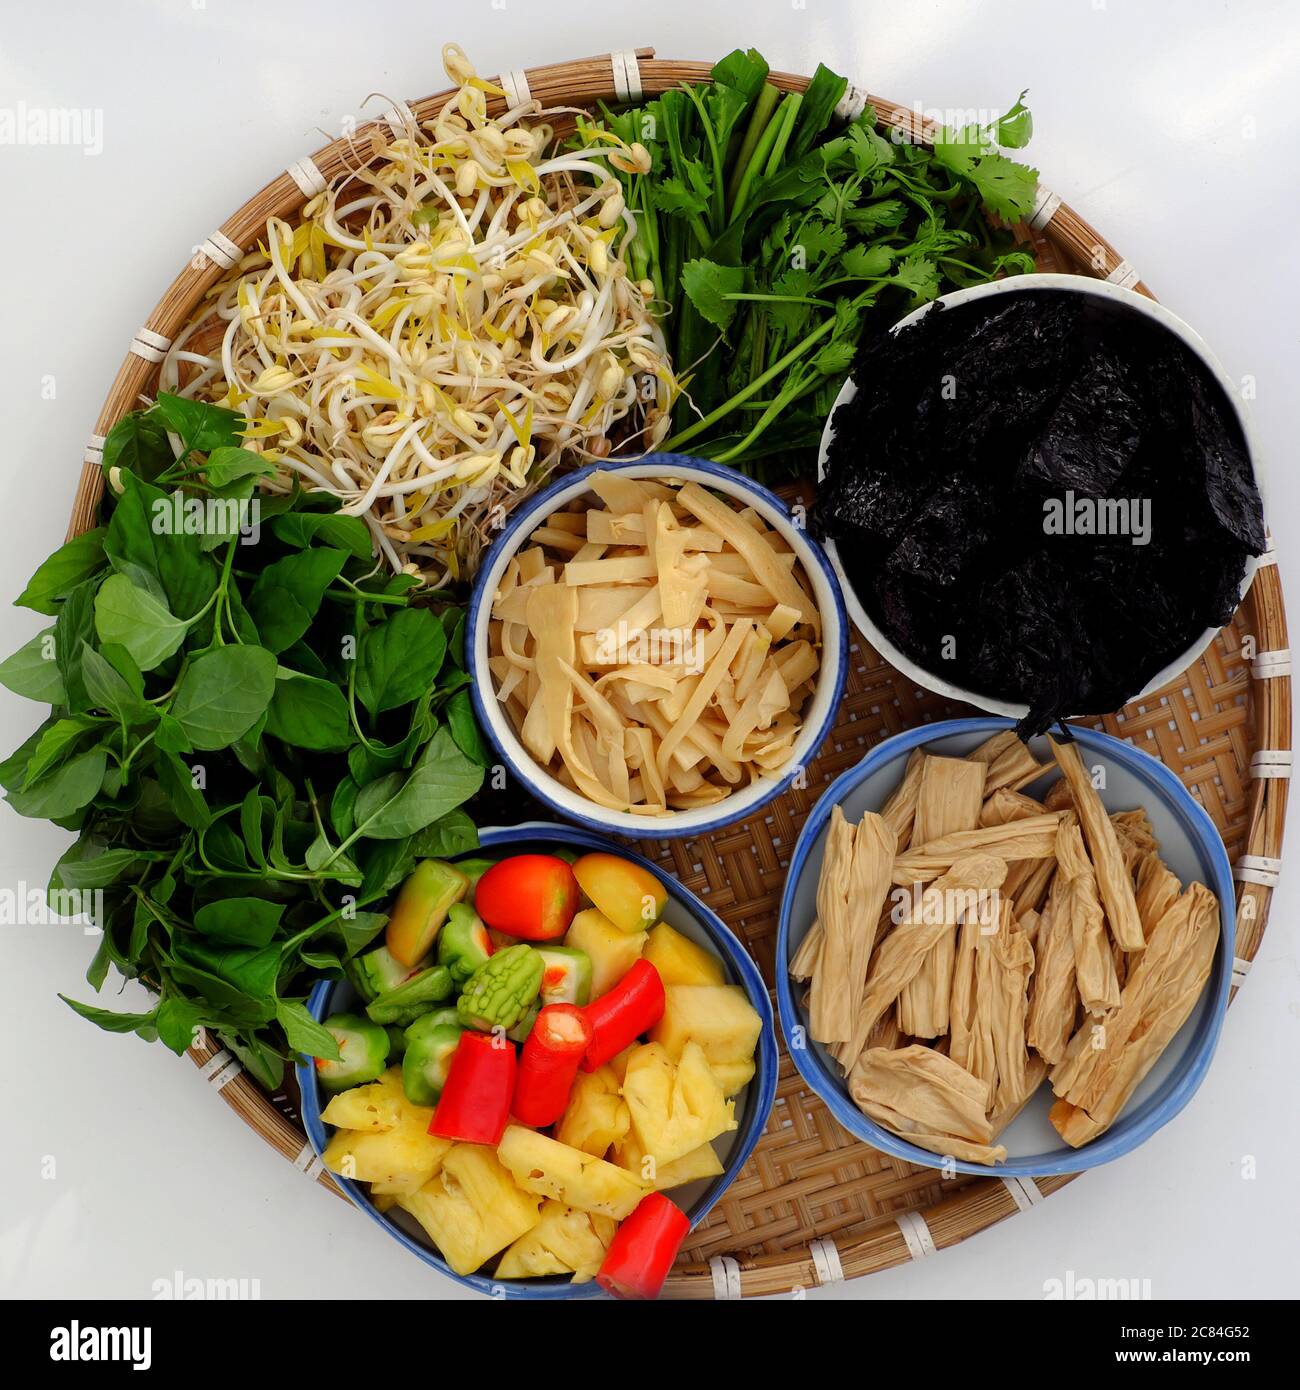 Top view raw material ready for daily meal, Vietnamese vegan food for vegetarian, tofu skin, pine apple, bitter melon, seaweed, vegetable on white Stock Photo